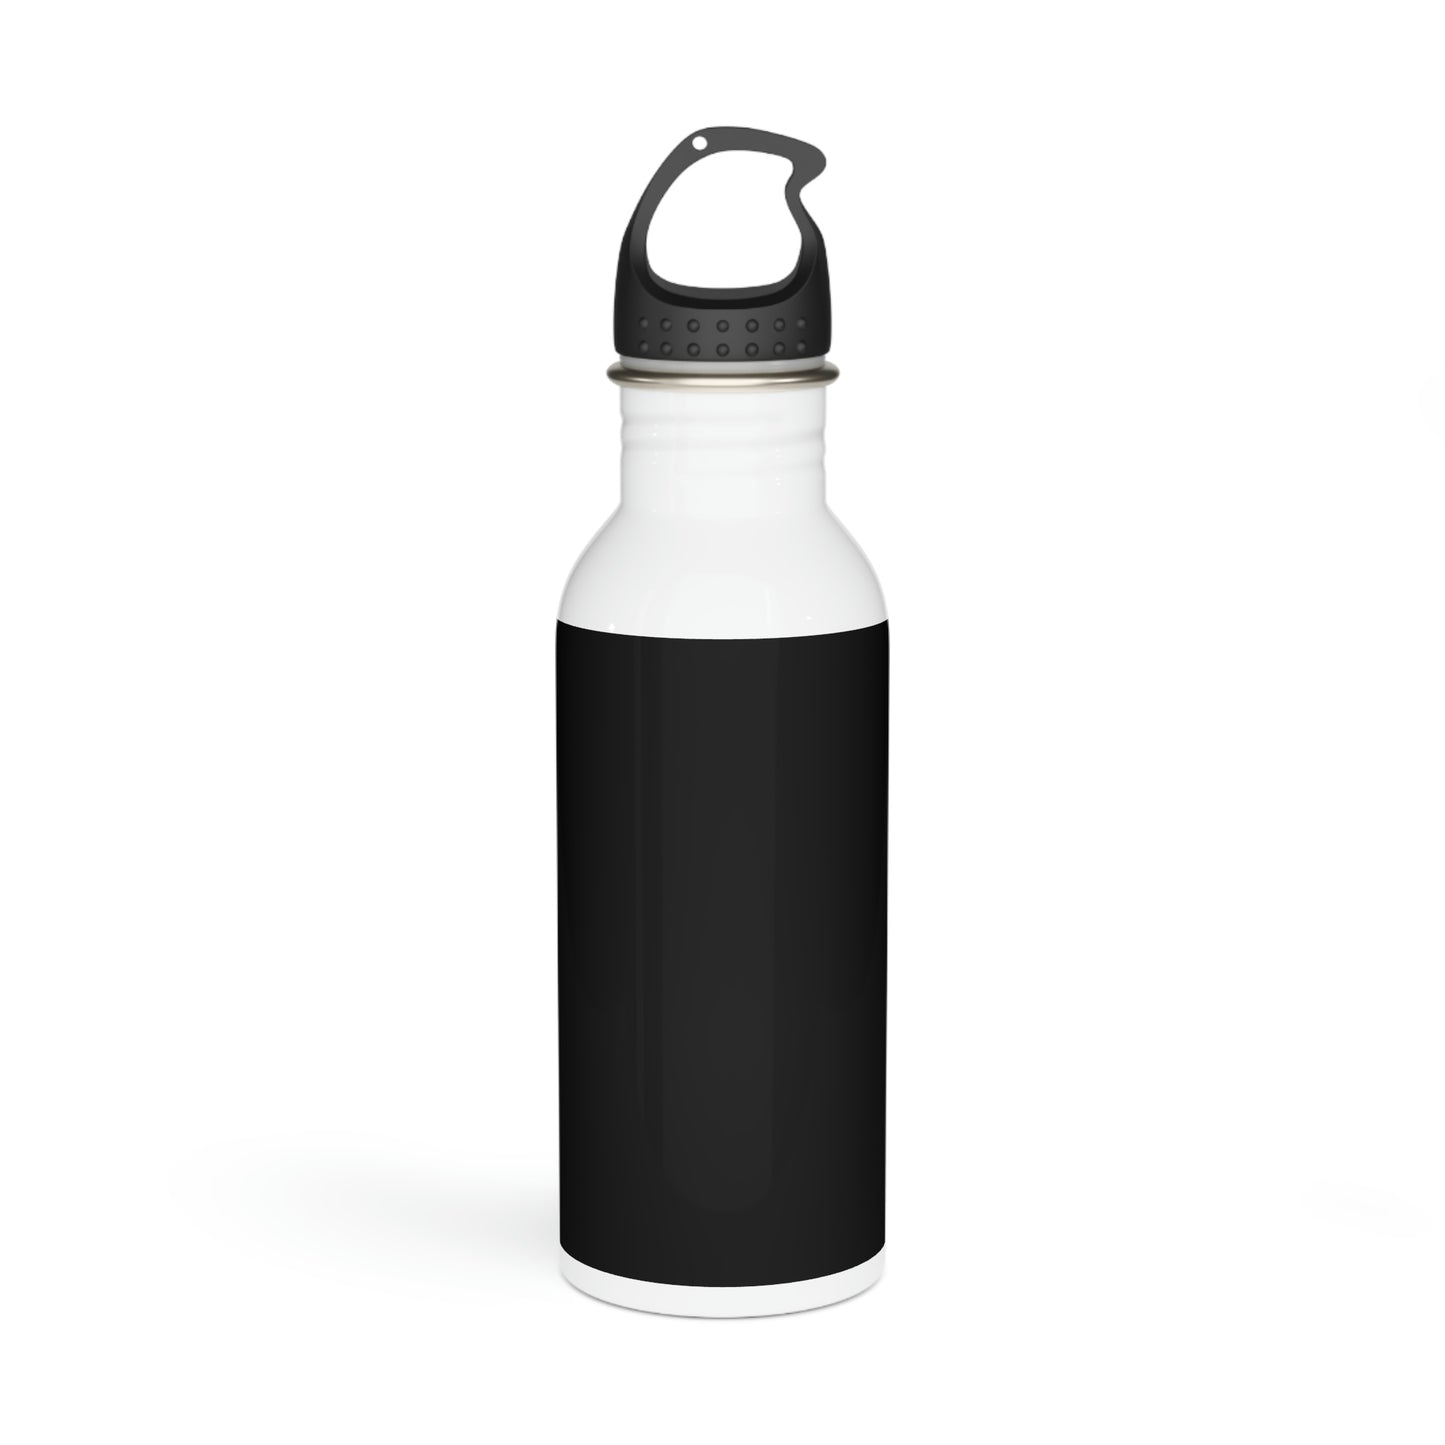 Of All the Paths AT - Stainless Steel Water Bottle